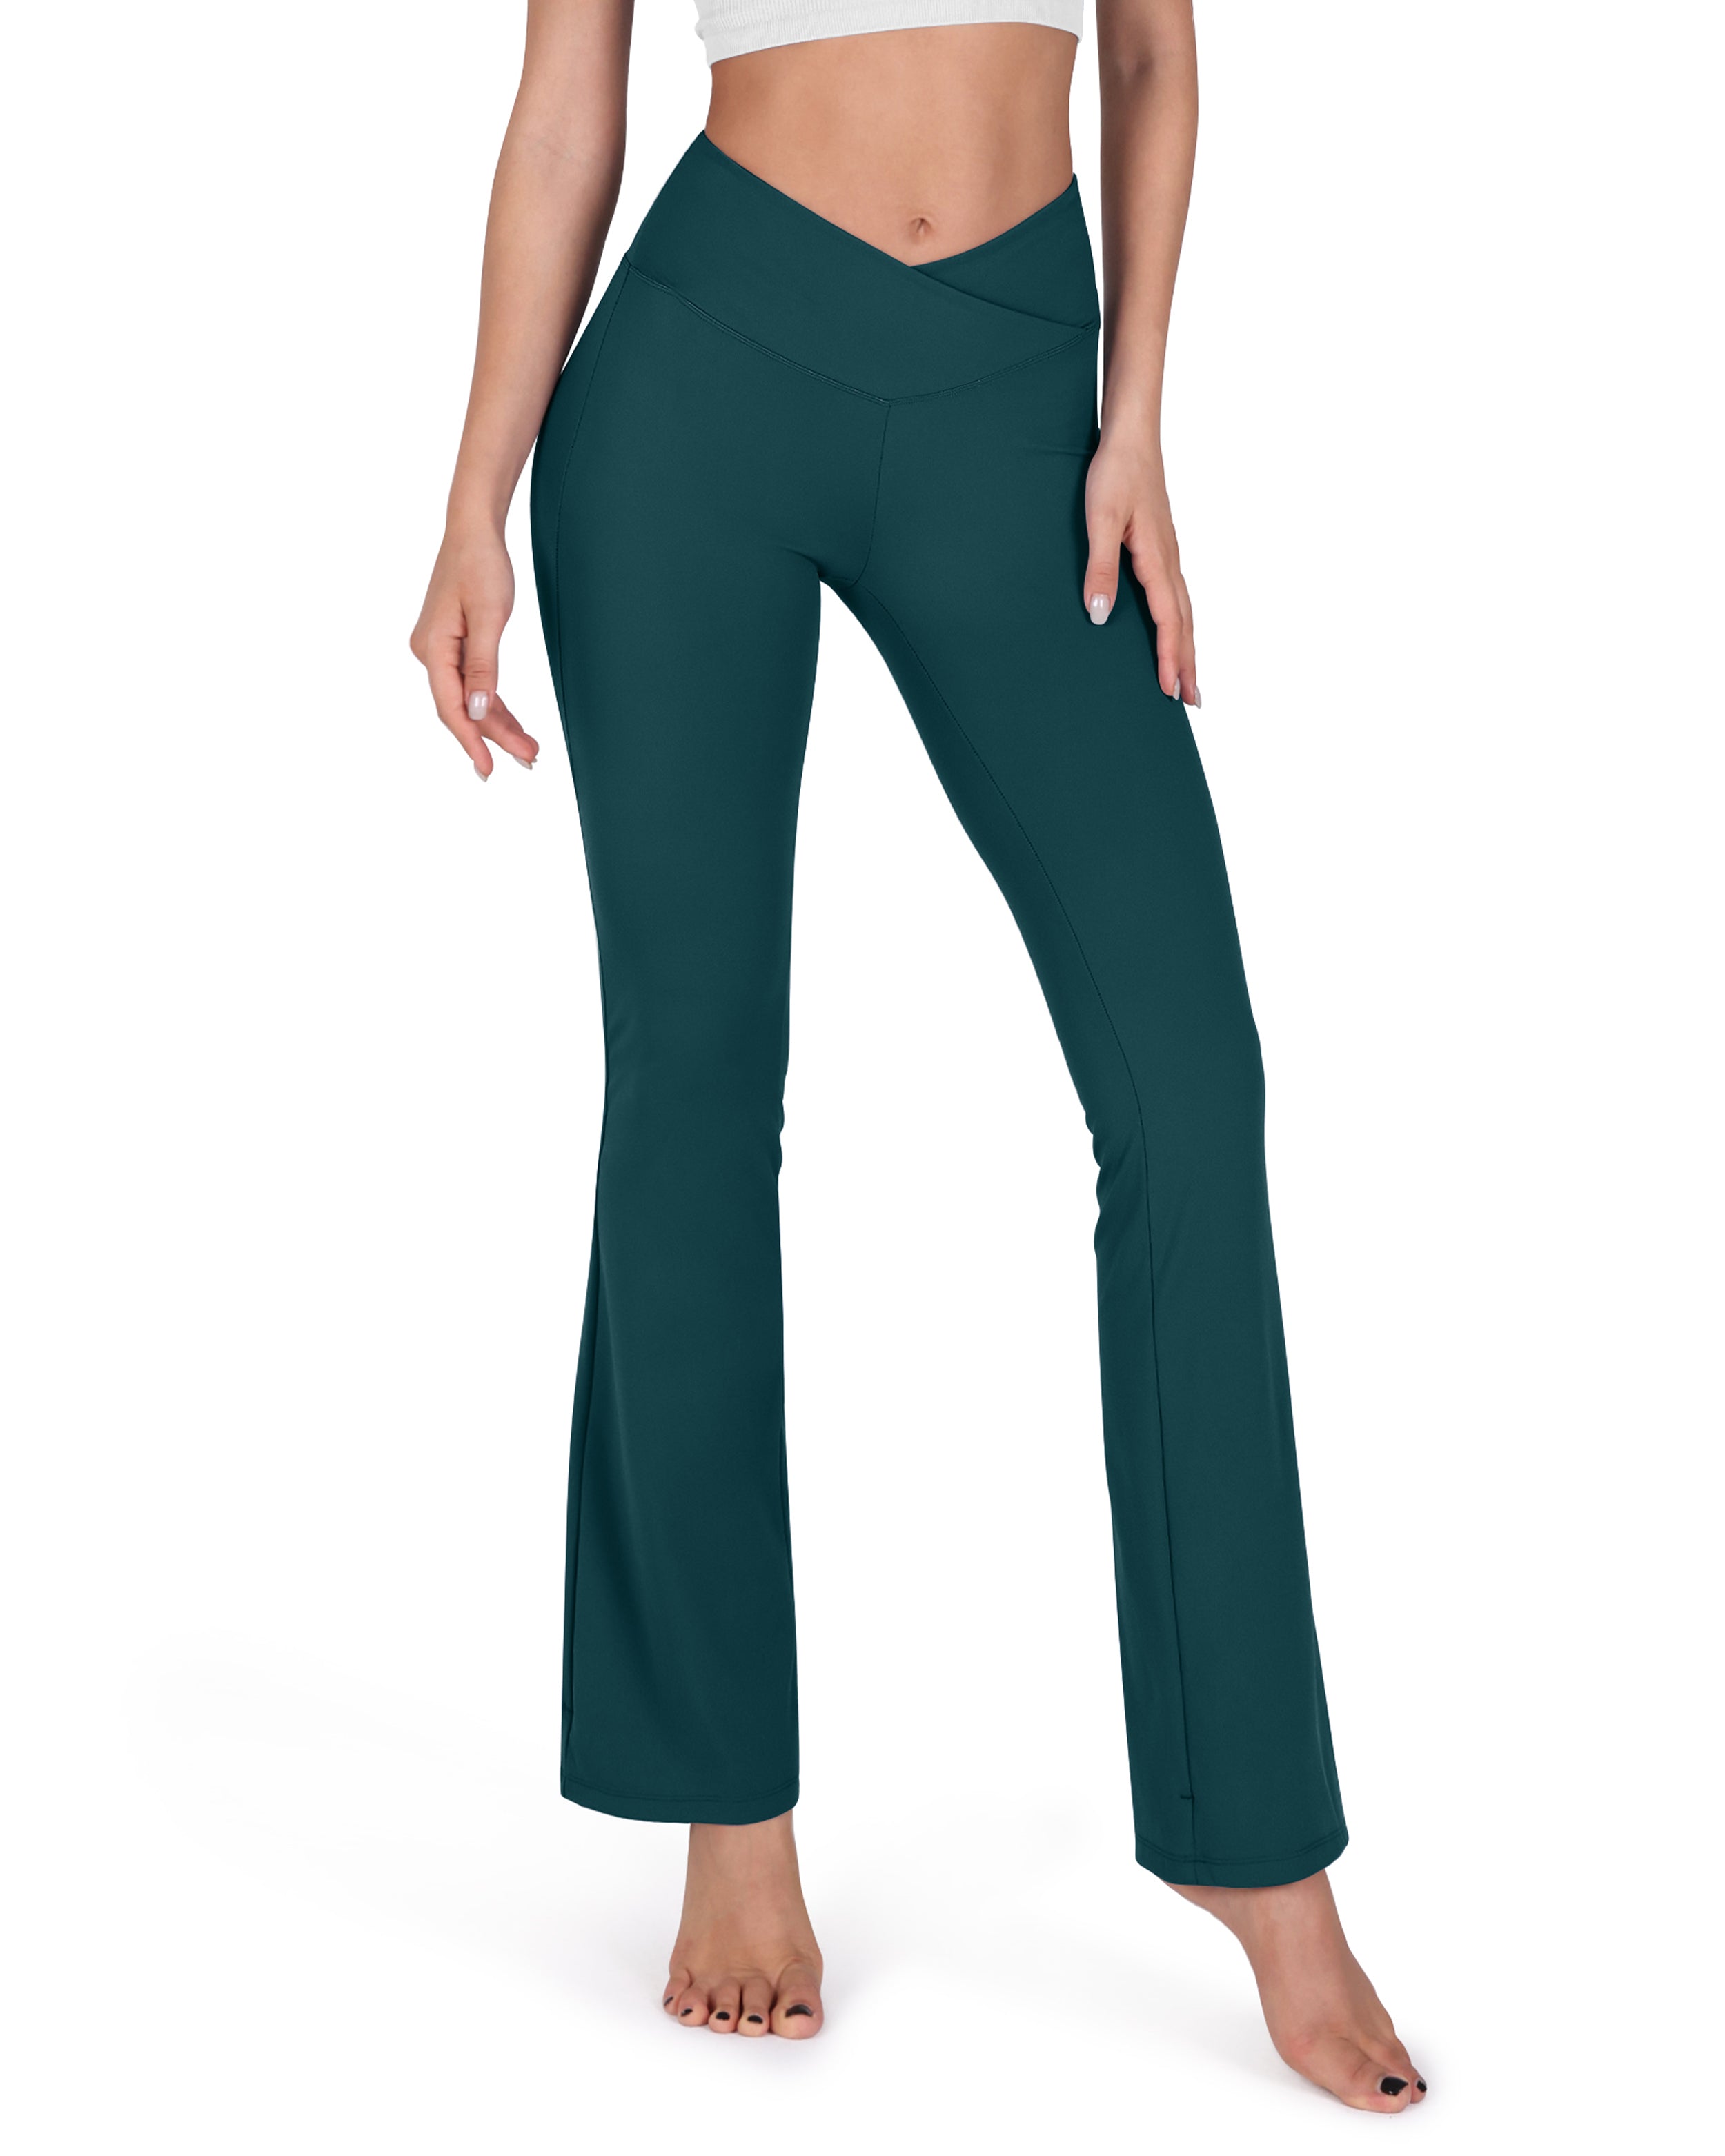 Cross Waist Workout Yoga Flare Pants Forest Teal - ododos